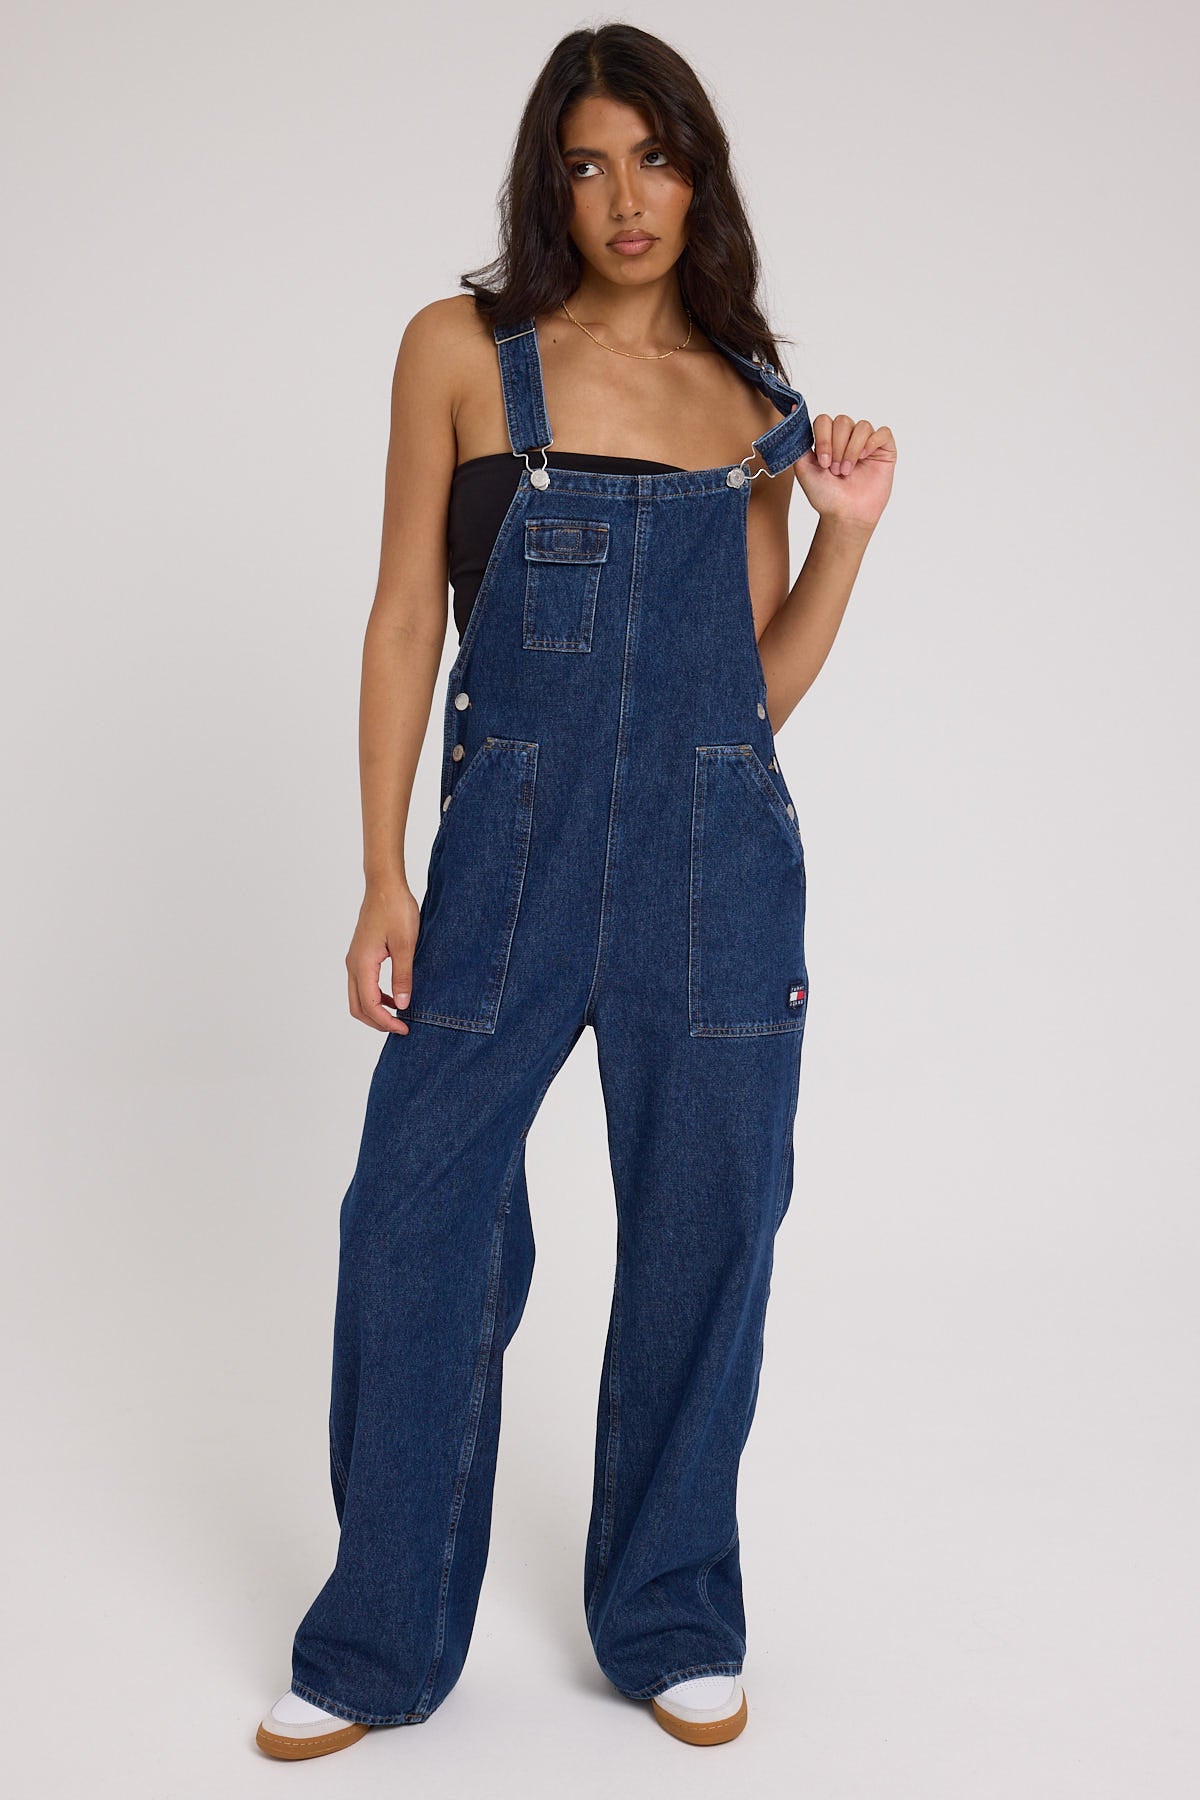 Tommy Jeans Dungaree Workwear Overall Dark Blue Denim